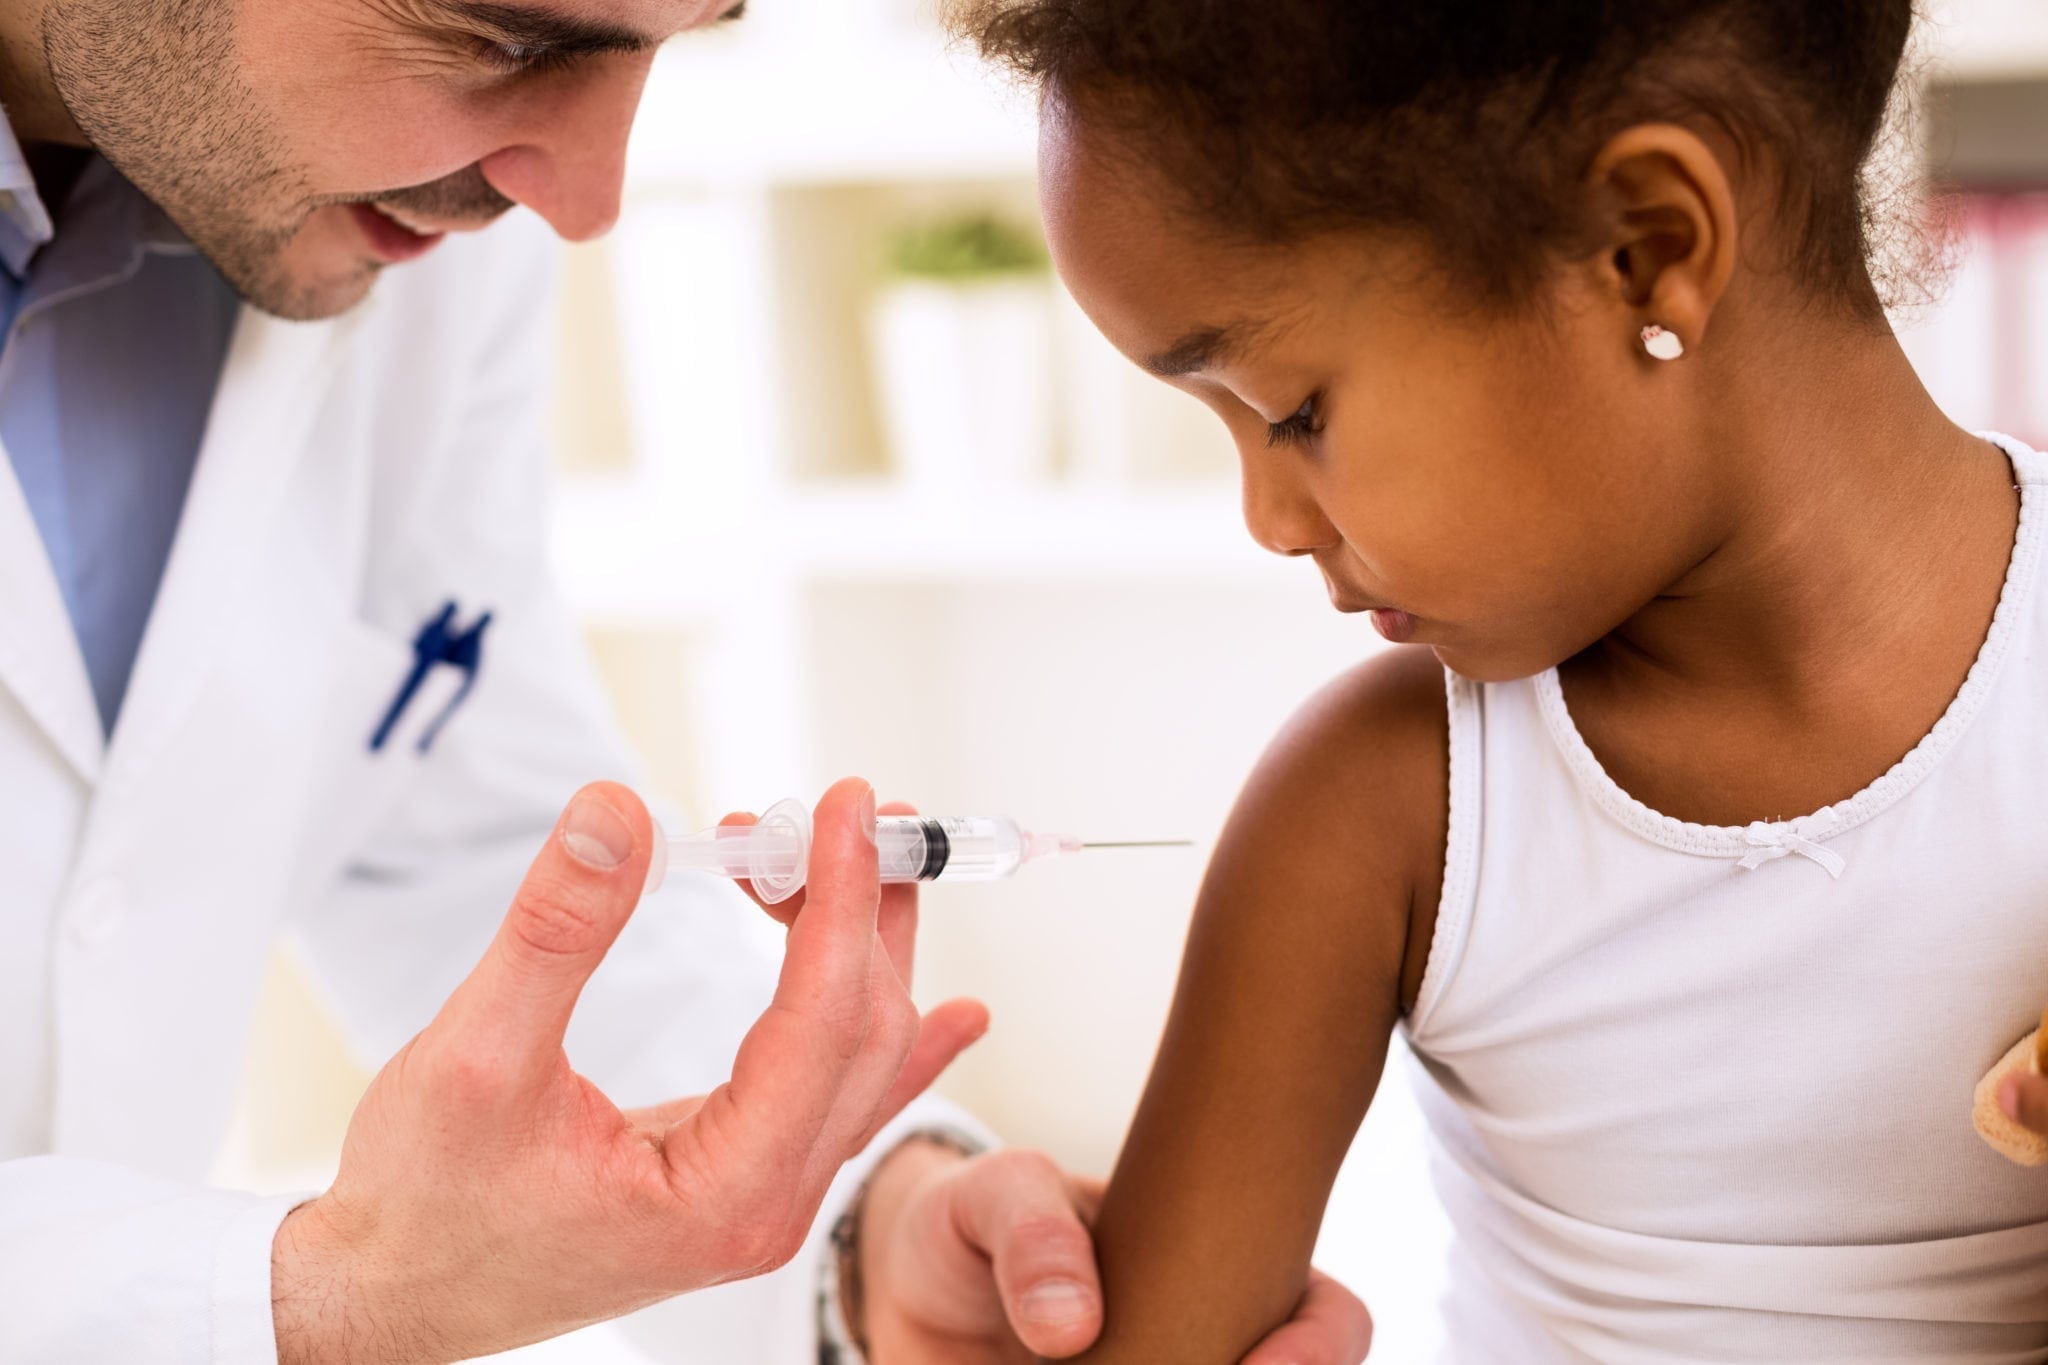 Childhood Vaccines: What They Are and Why Your Child Needs Them